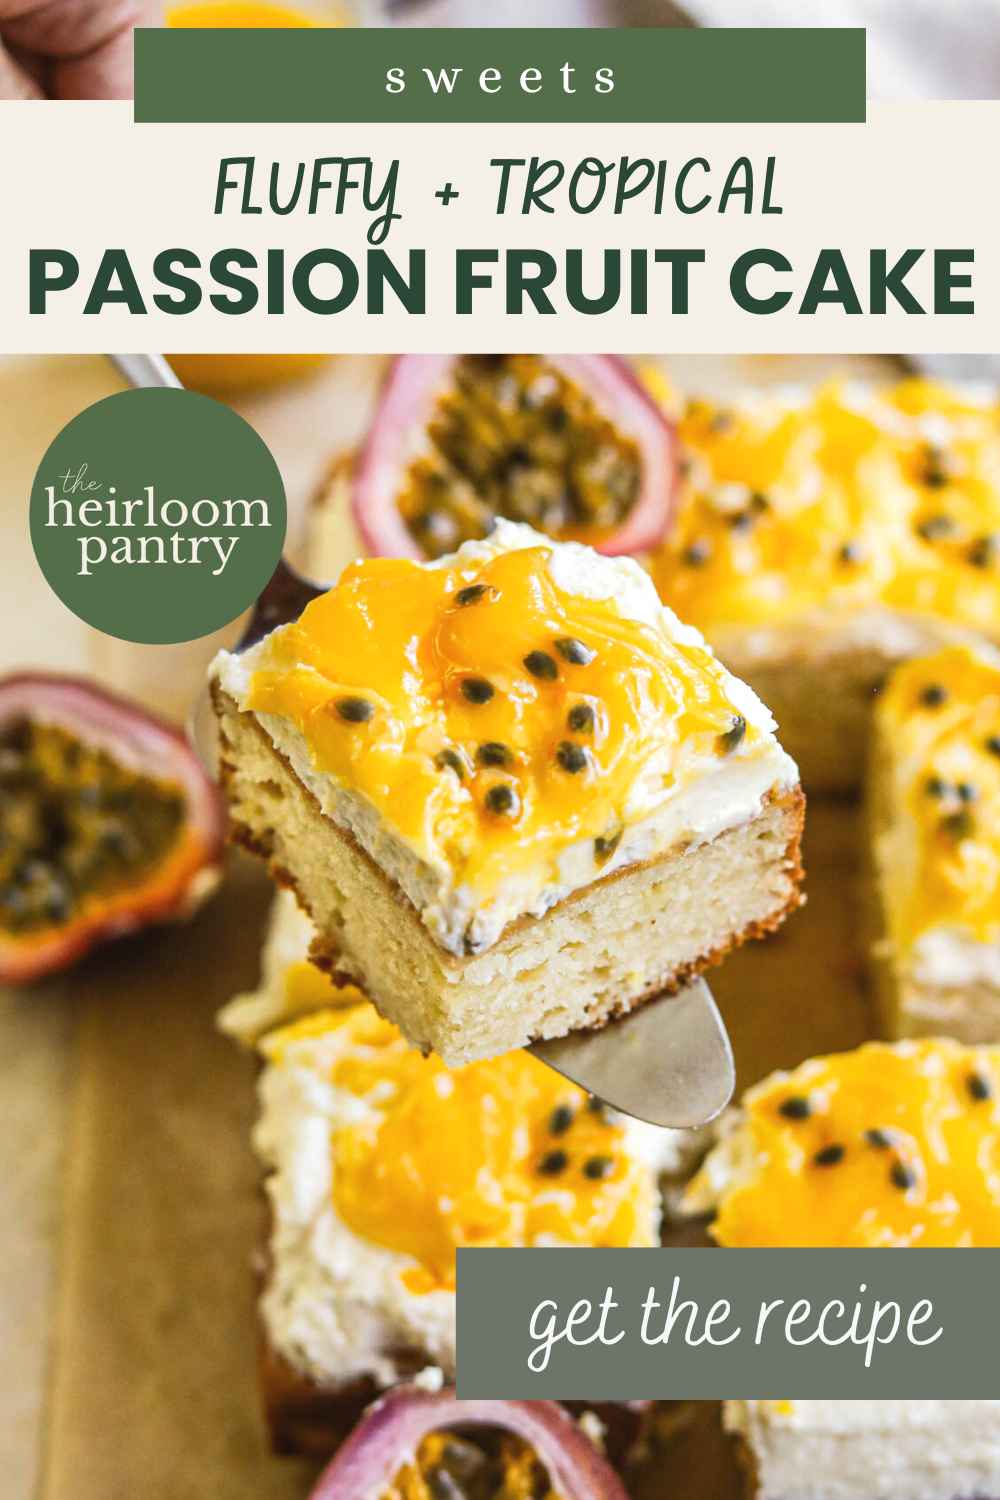 Passion fruit cake with lilikoi butter ans mascarpone frosting Pinterest pin.